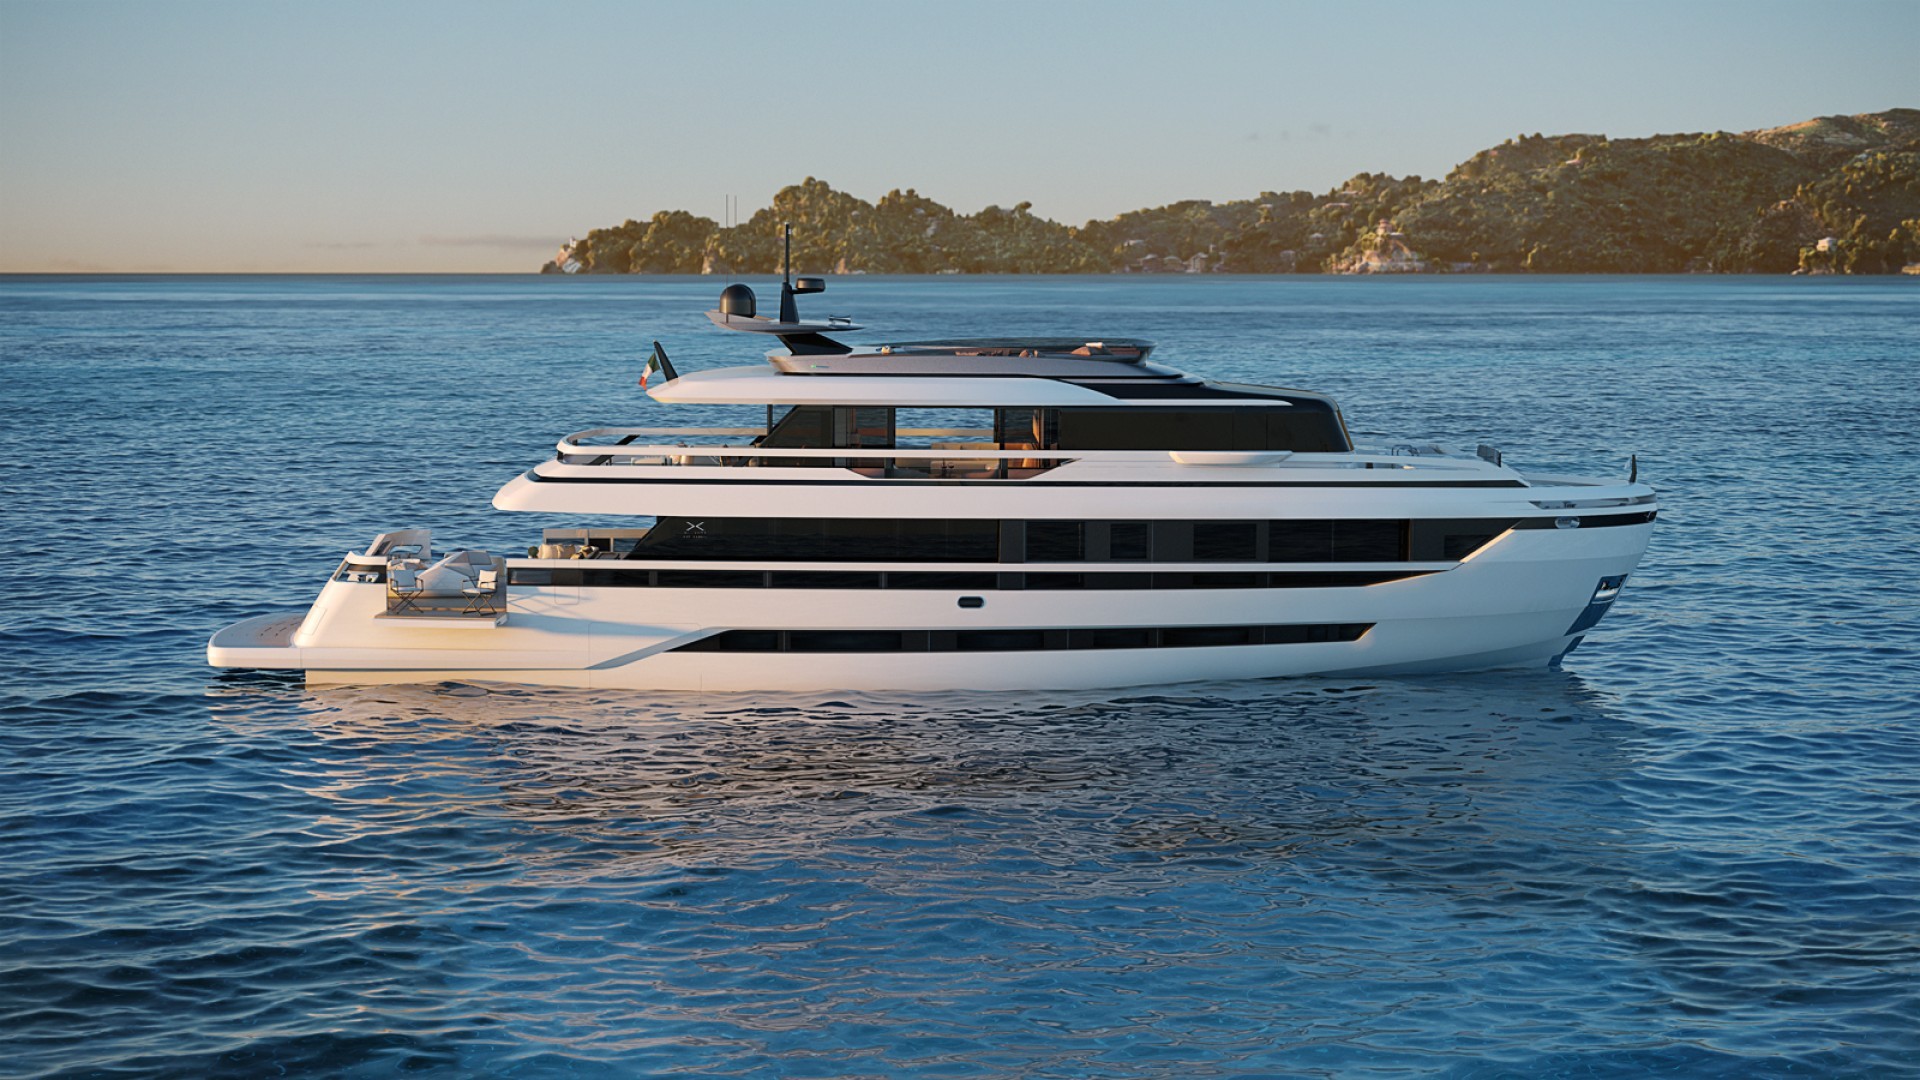 Extra Yachts, brand of ISA Yachts, presents the new X115 Triplex